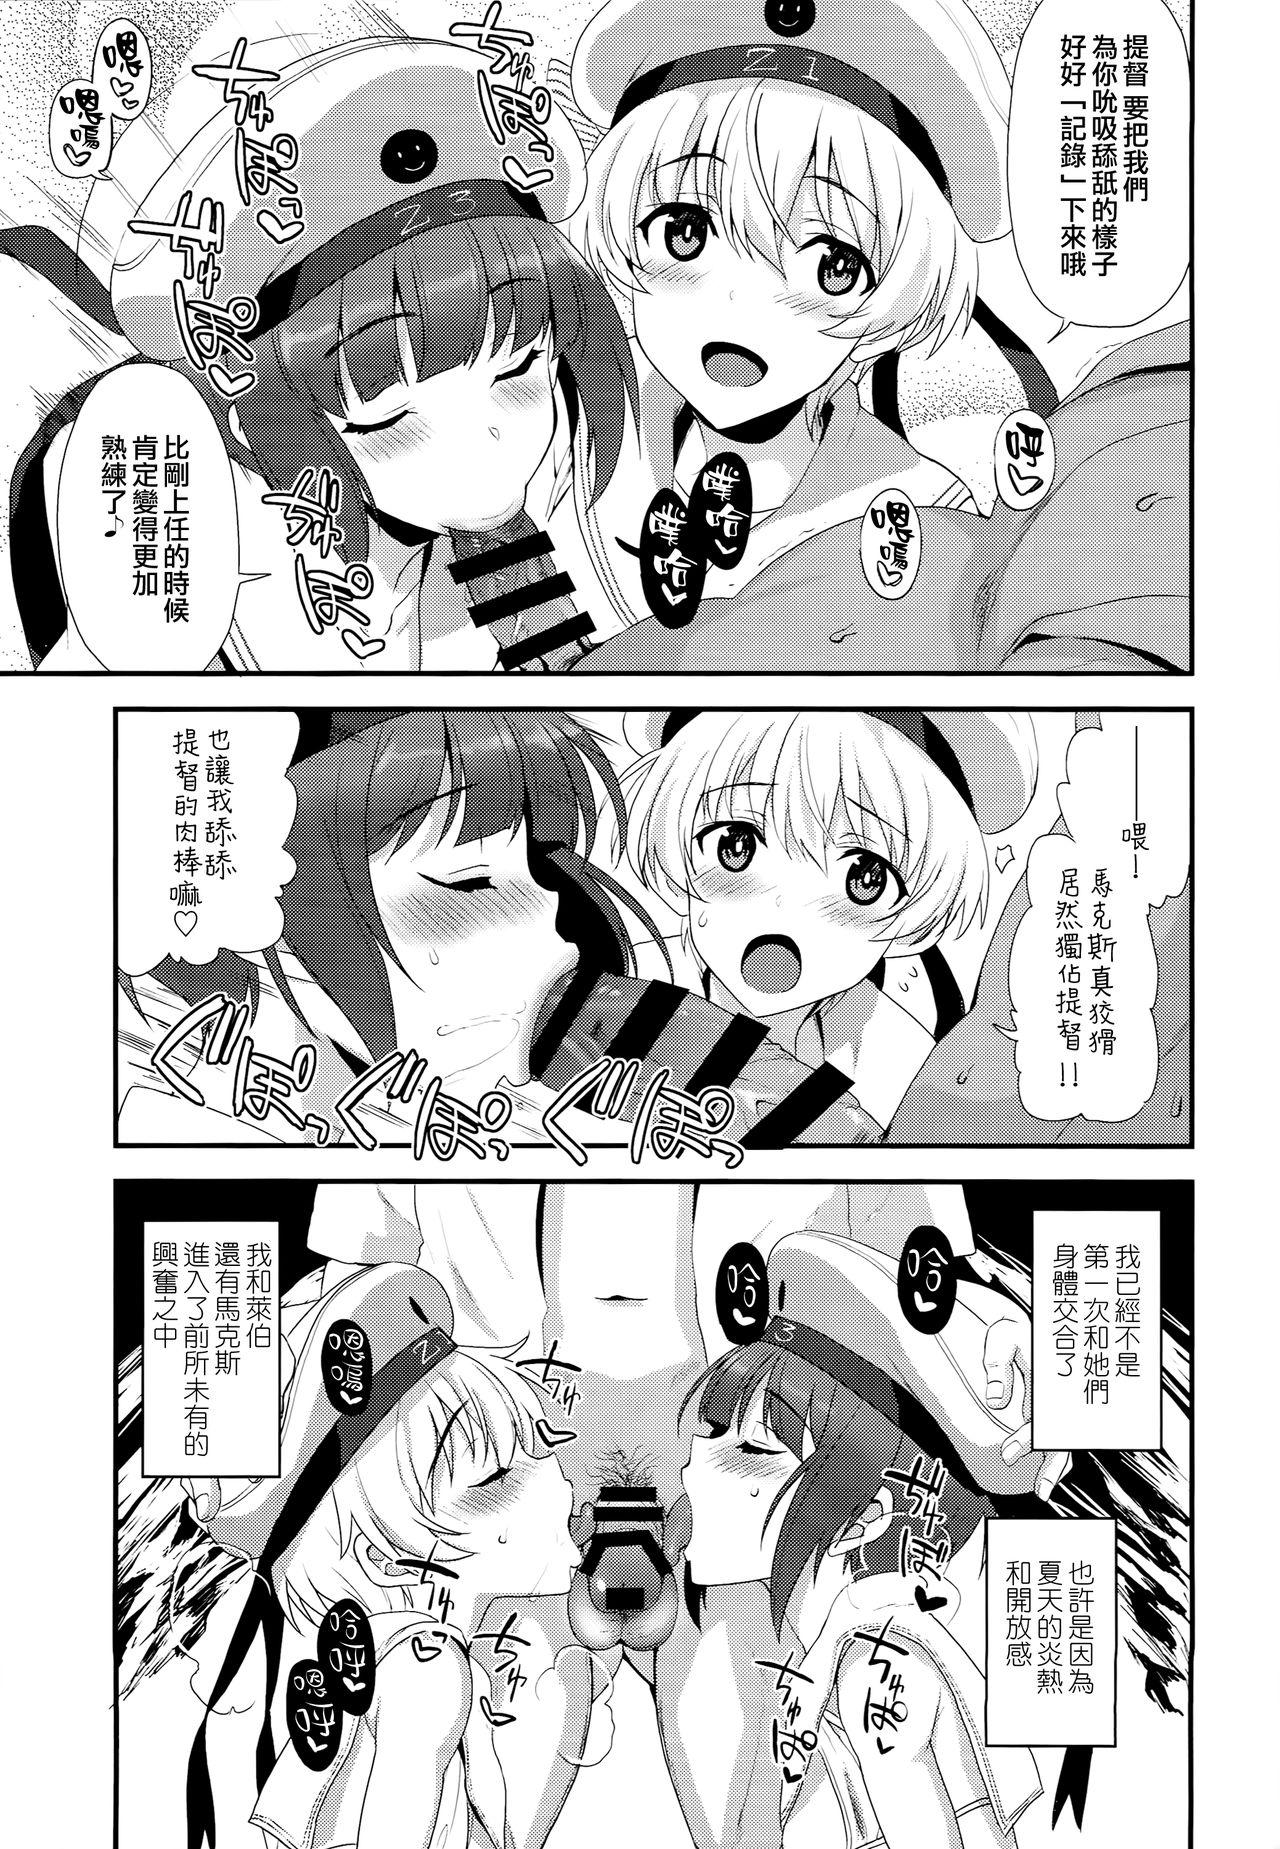 With Apfelschorle - Kantai collection Top - Page 7